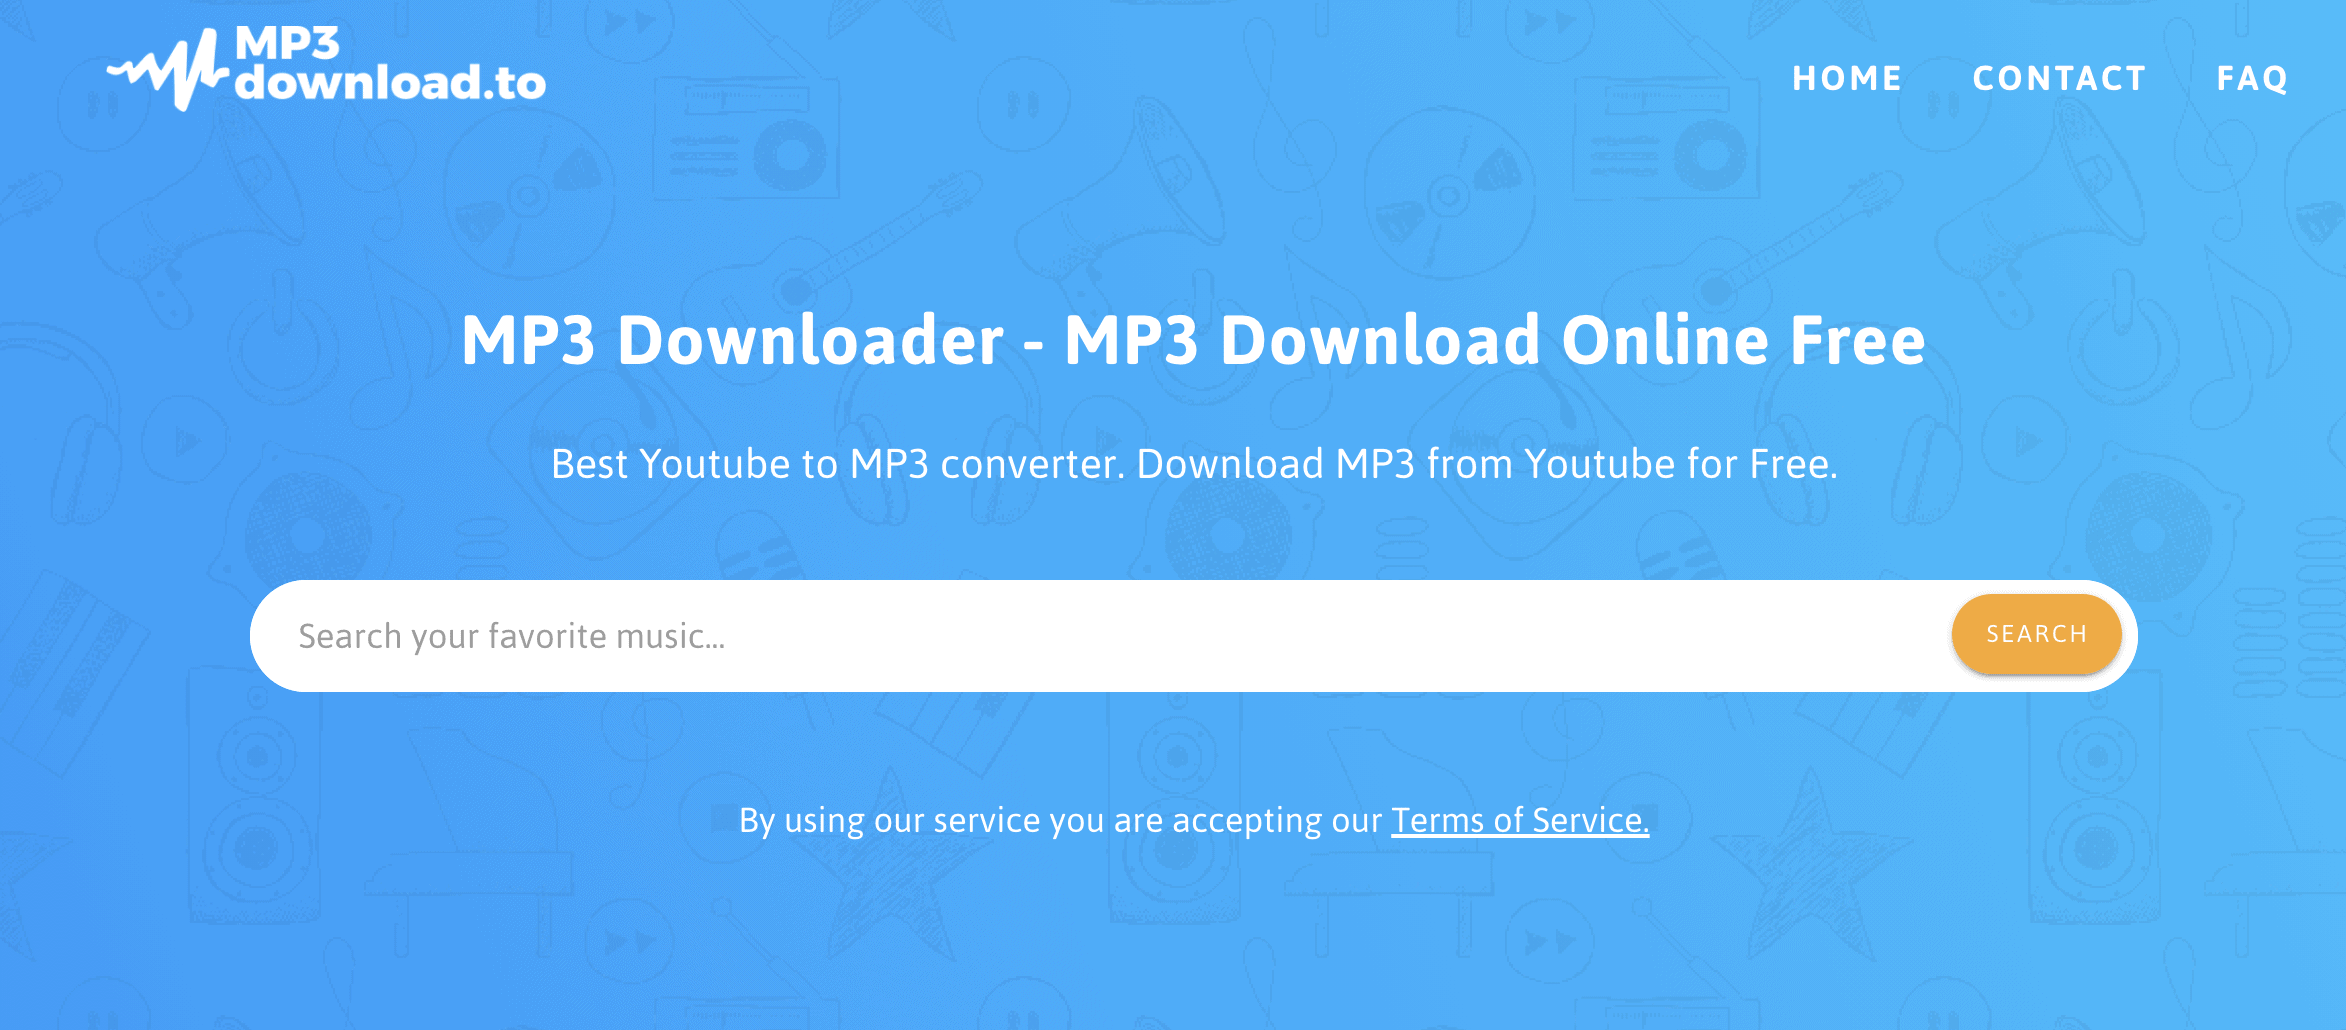 MP3 Download, youtube to mp3 converter